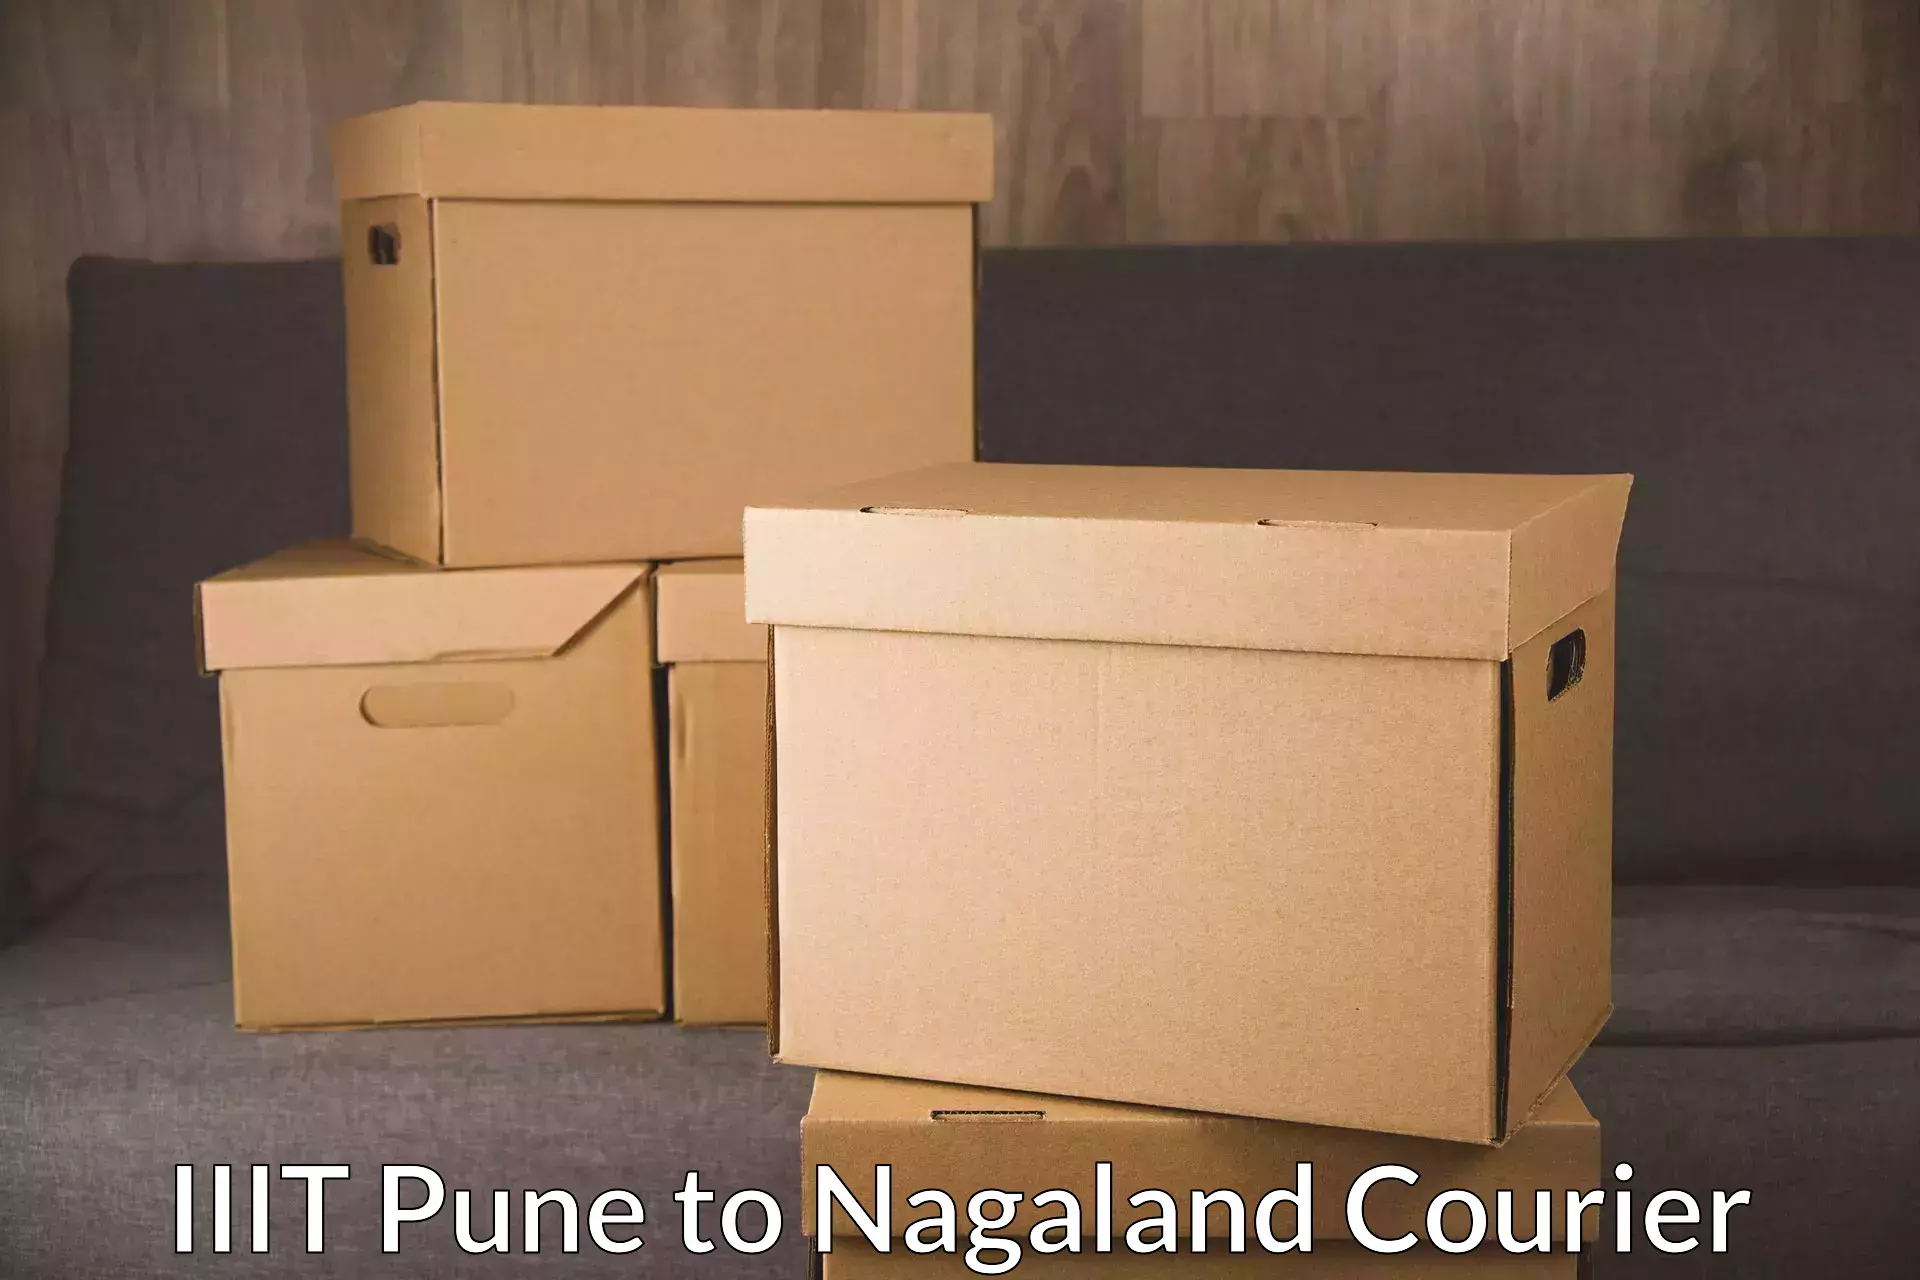 Global shipping networks in IIIT Pune to Nagaland